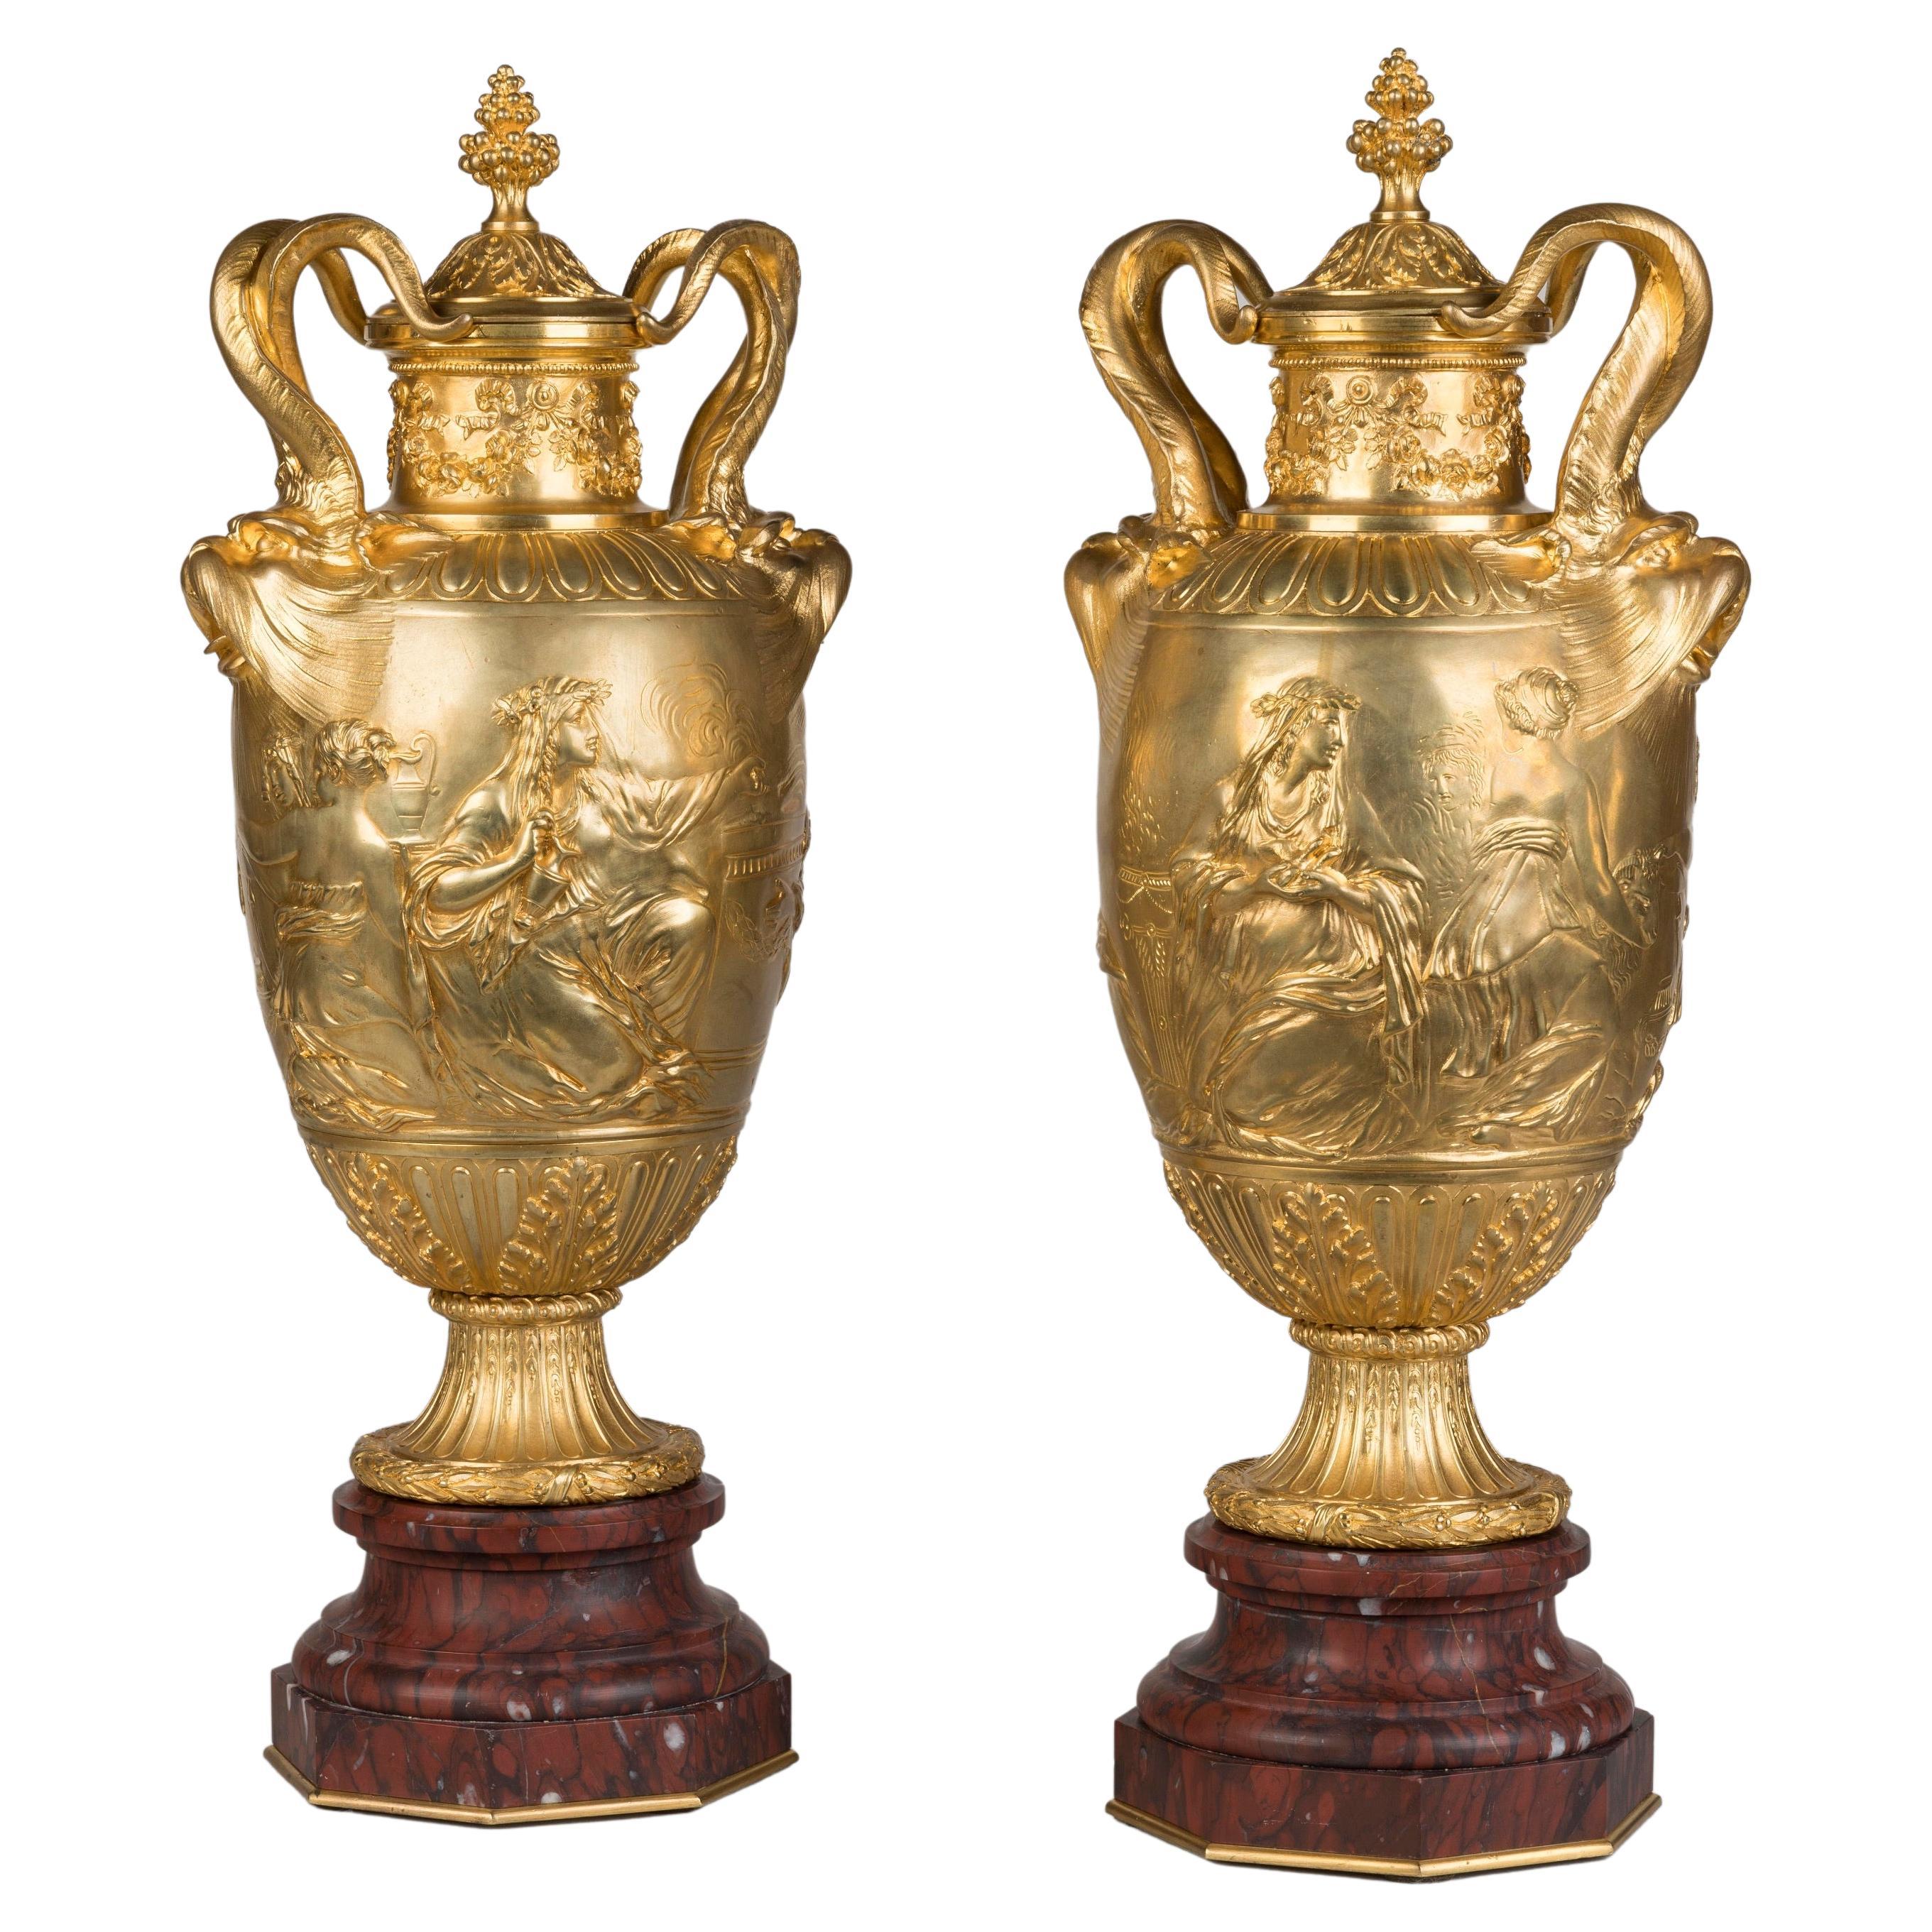 19th Century Pair of Gilt Bronze Vases Designed by Clodion Made by Barbedienne